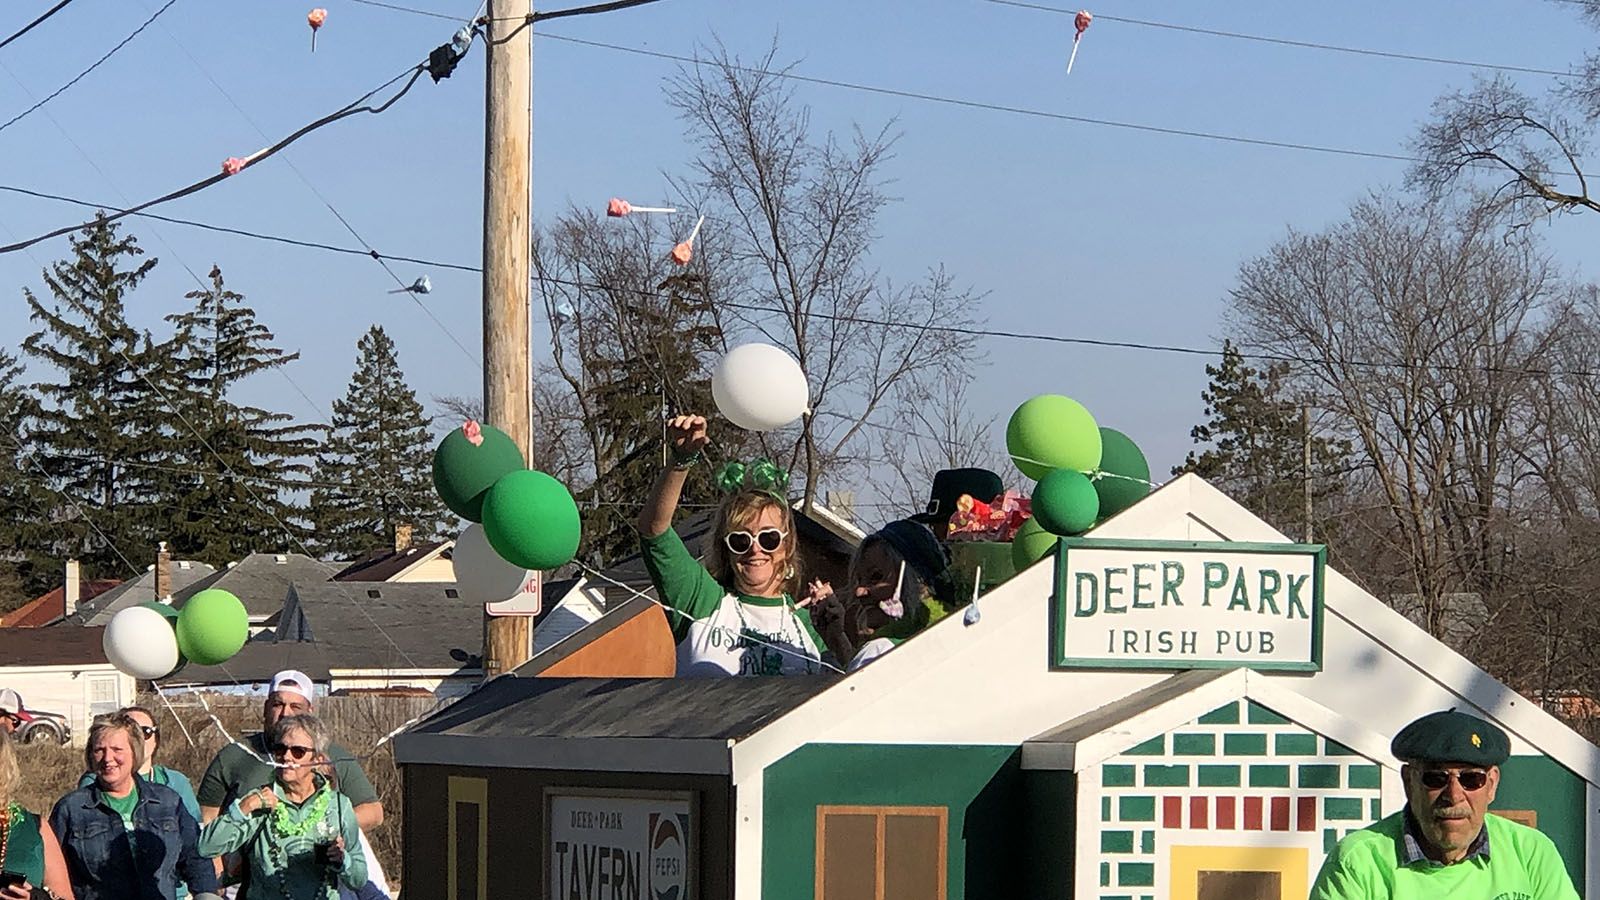 The People’s Parade is a popular sight during Deer Park Irish Pub’s annual Clover Classic.